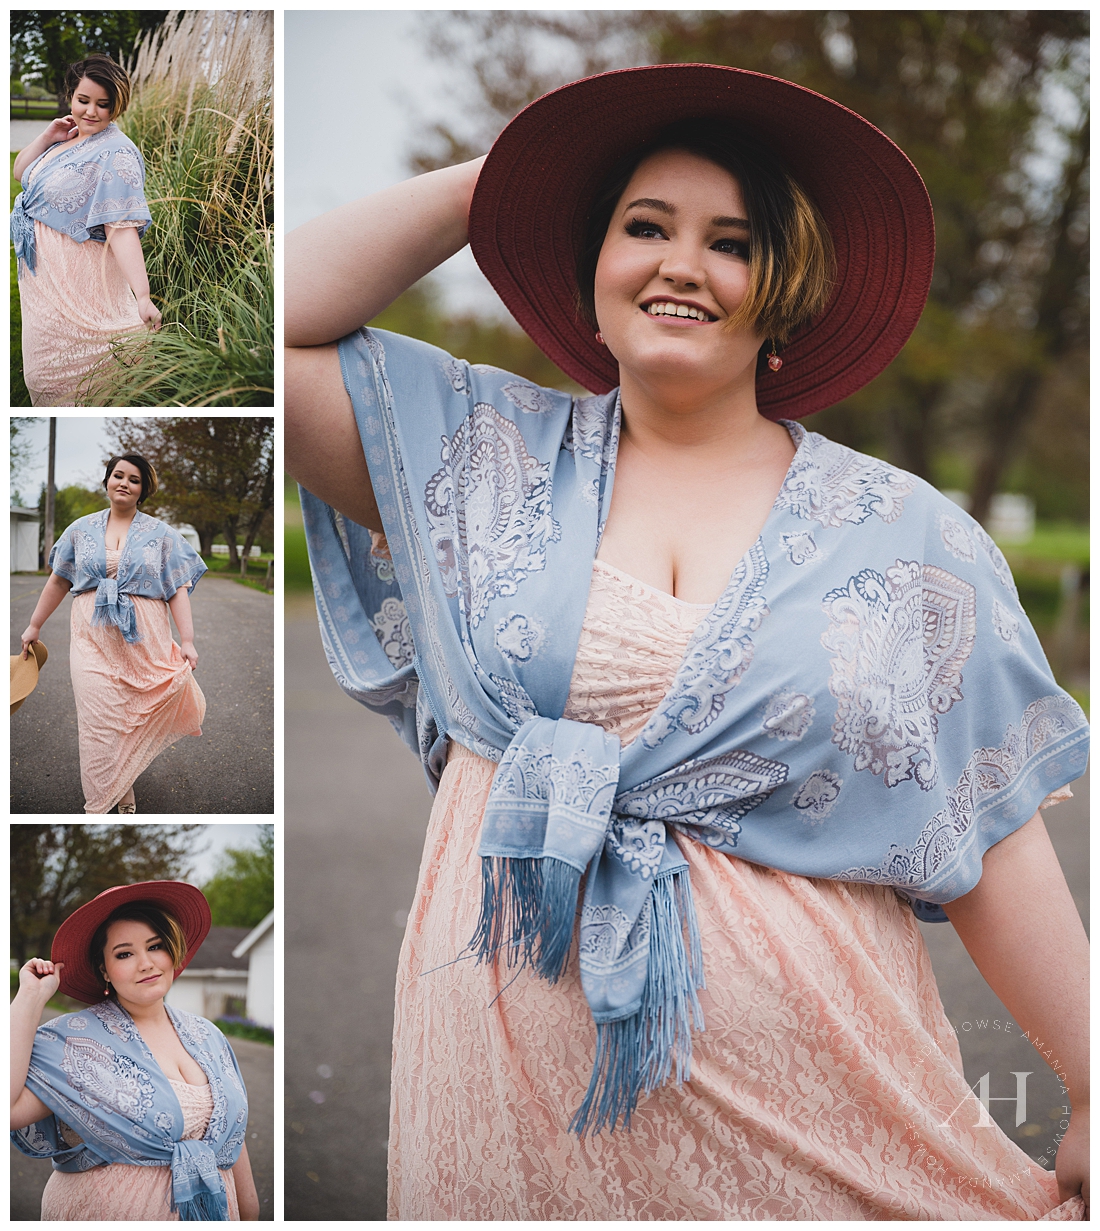 Cute Spring Portraits of High School Seniors | How to Style a Shawl, Maxi Dress and Hat Ideas, Spring Inspiration | Photographed by the Best Tacoma Senior Photographer Amanda Howse Photography